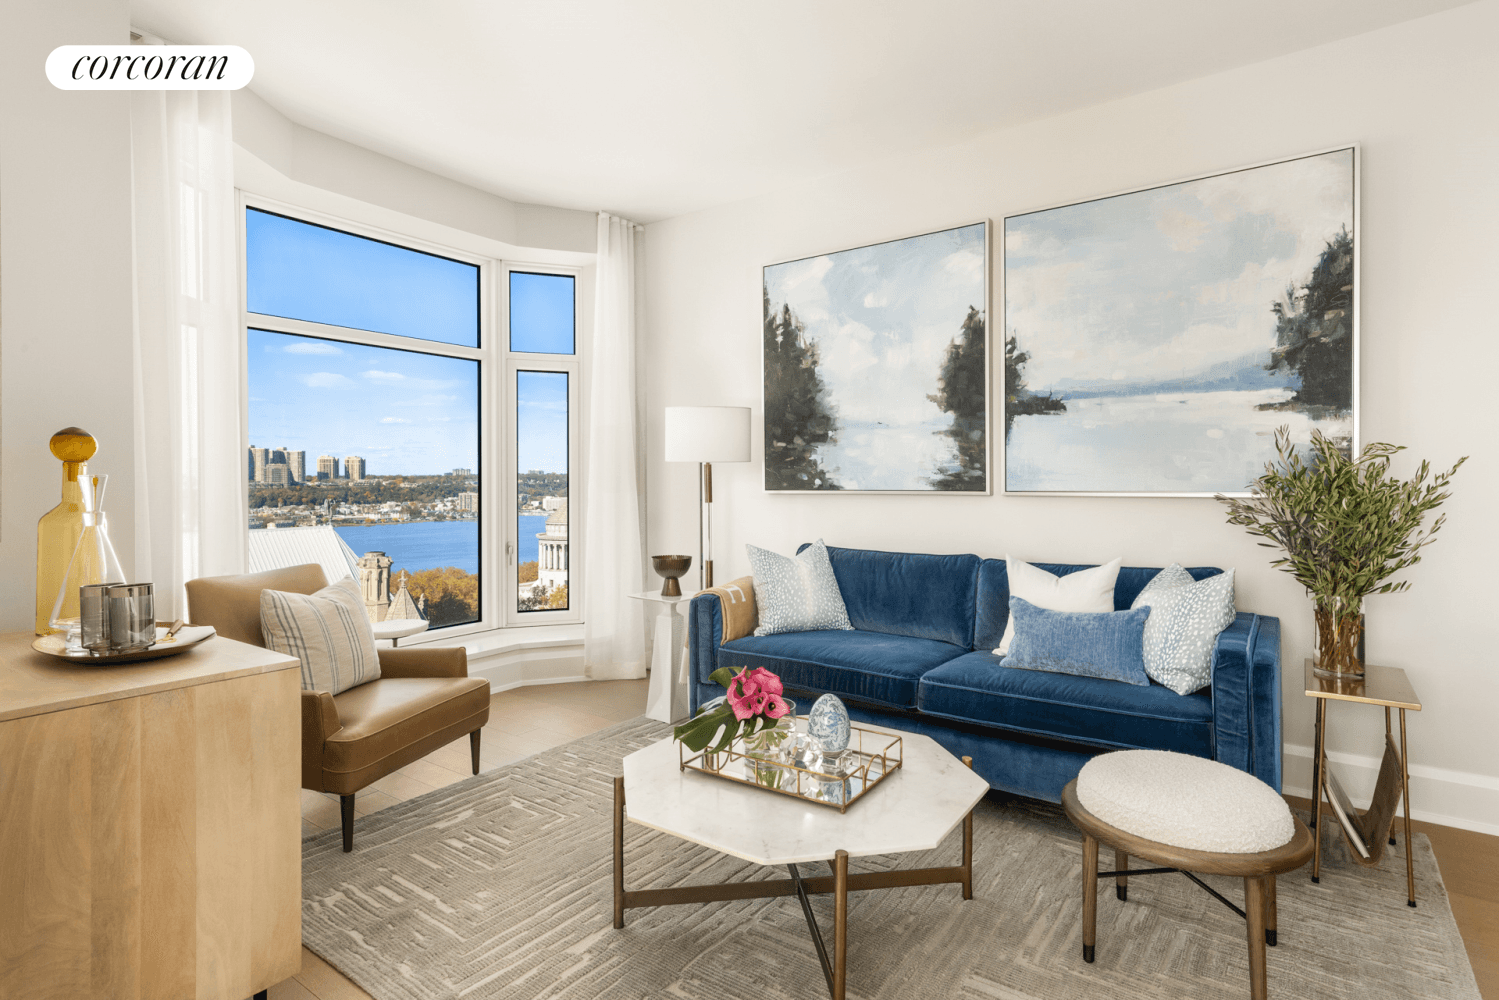 IMMEDIATE OCCUPANCYA charming 807 square foot one bedroom home, Residence 25C enjoys sweeping western views over the iconic spire of Riverside Church, the Hudson River, and the George Washington Bridge.